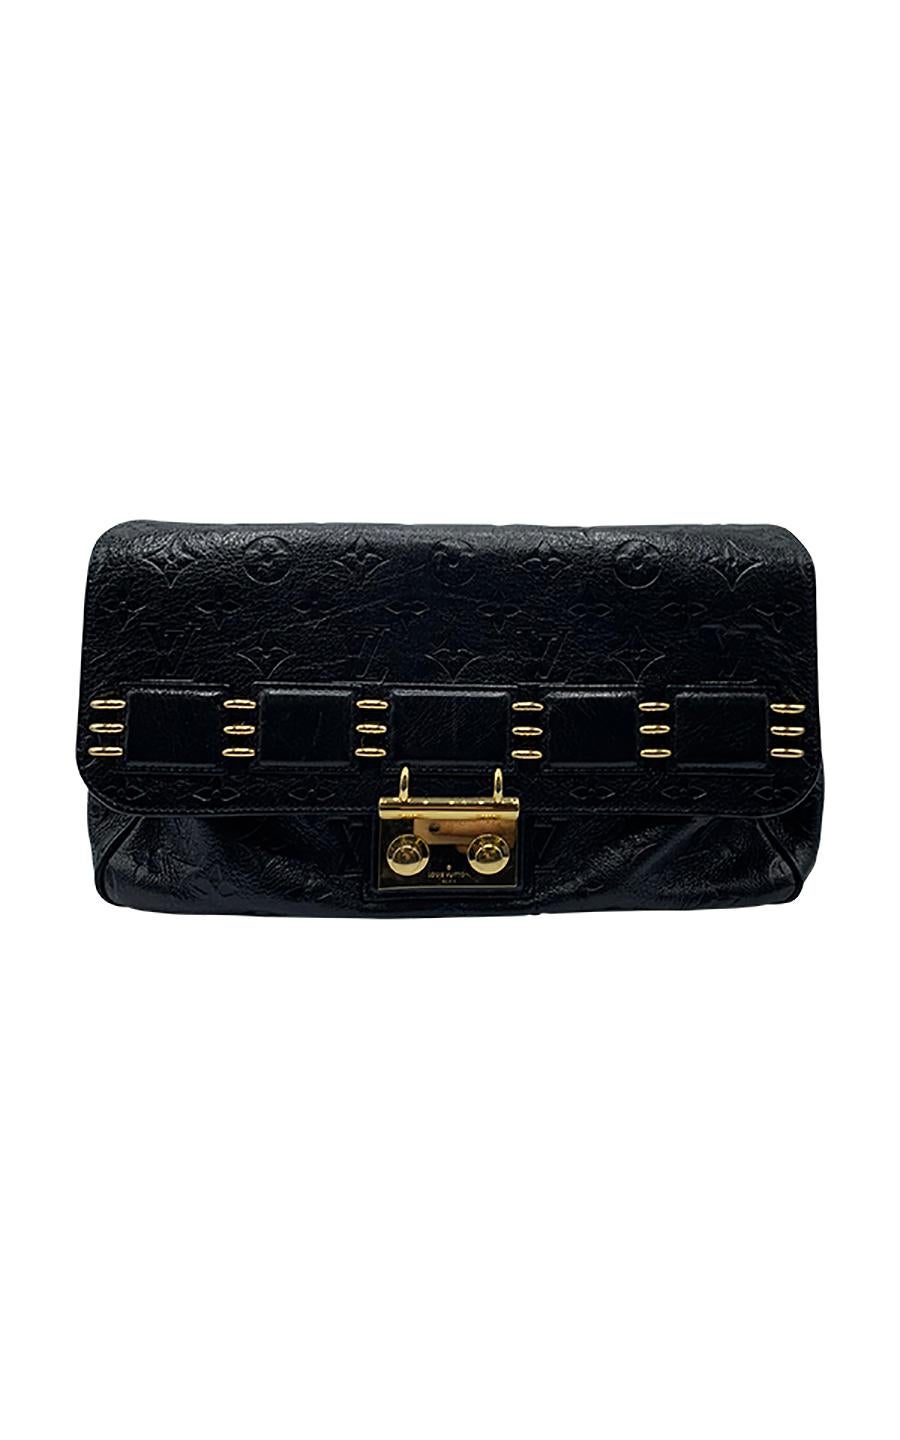 Vintage Louis Vuitton Autumn/Winter 2009/2010 collection monogram Empreinte black monogram leather bag, in excellent pre-loved condition. This exquisite shoulder bag is small, yet stylish in size, and will complement your formal and more casual